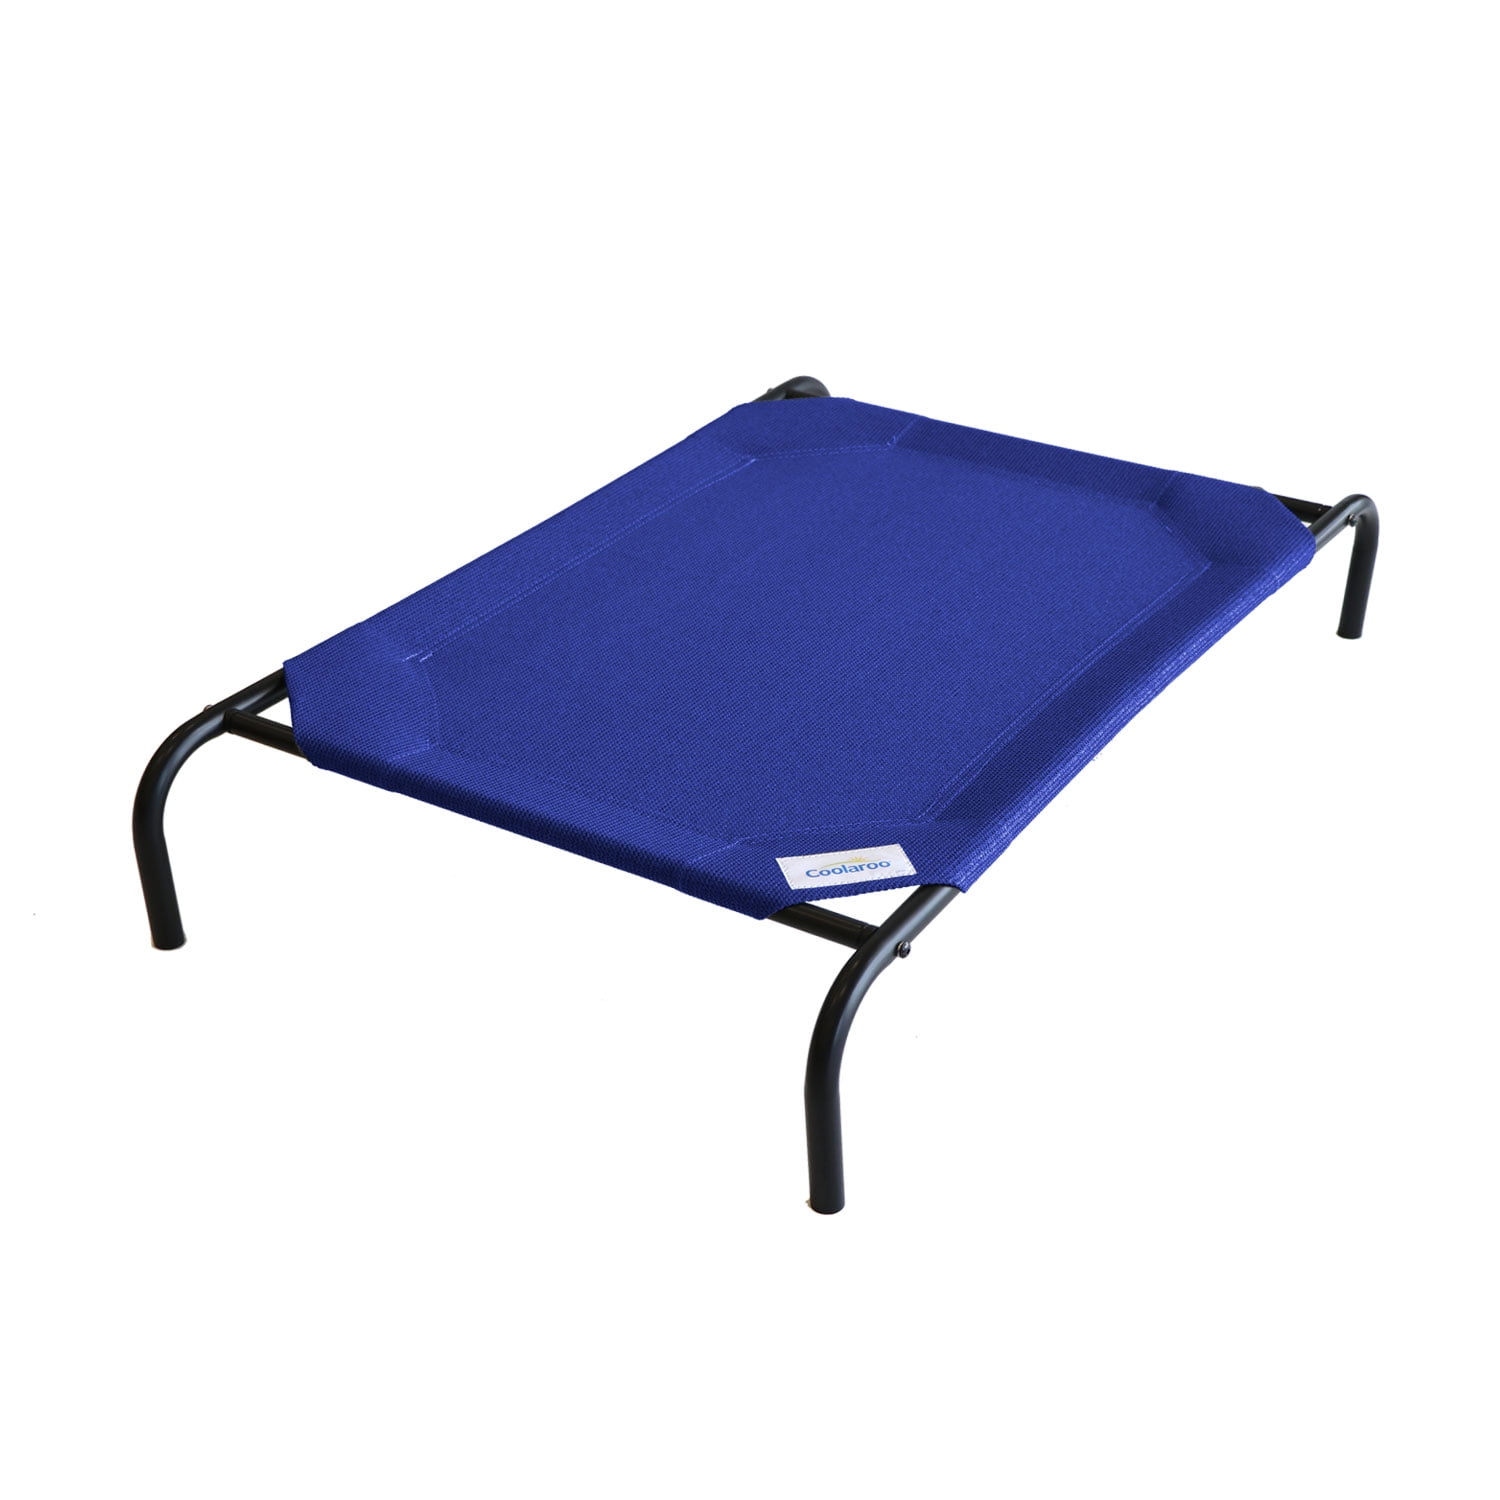 The Original Coolaroo Elevated Pet Dog Bed for Indoors & Outdoors, Large, Aquatic Blue